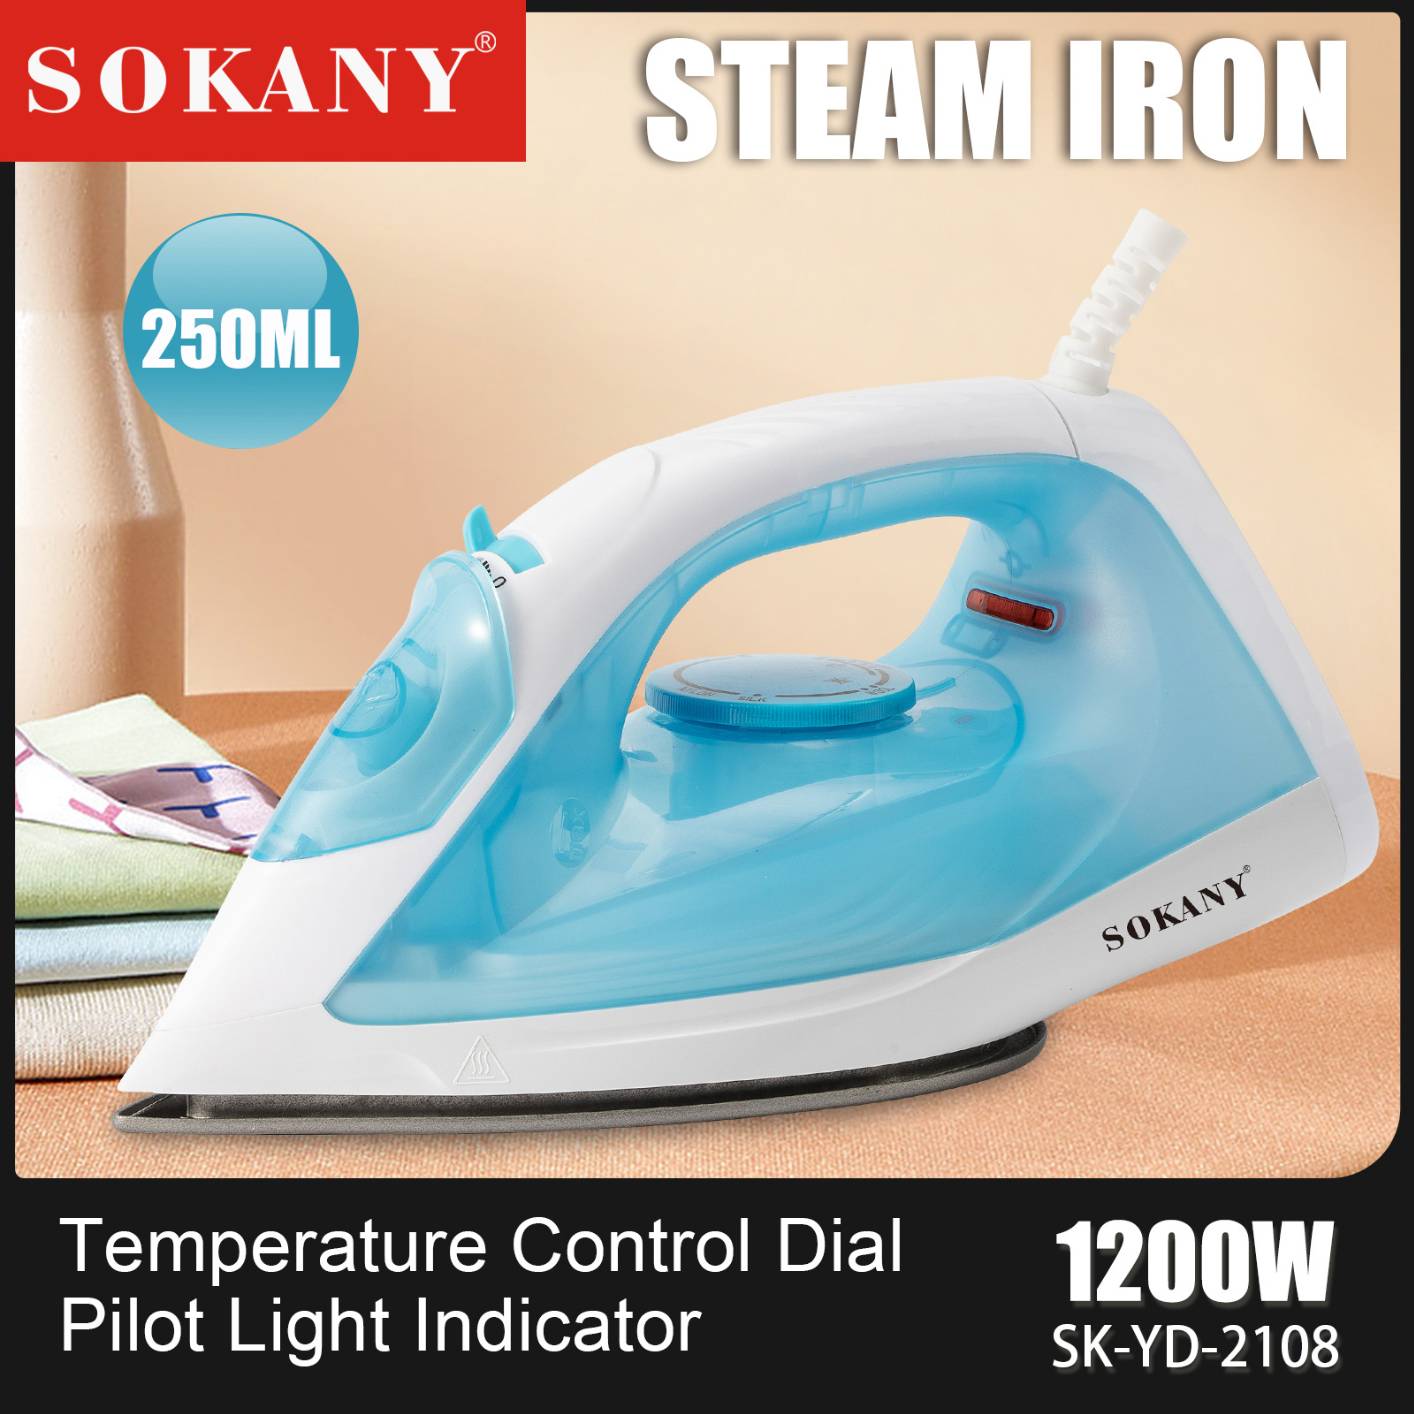 SOKAY 2108 Steam Iron for Clothes, 1200W Rapid Even Heat, Lightweight Portable Steam-Dry & Steam Iron - Best for Travel – Self Clean, 250ml Water Tank, Non-Stick Ceramic Soleplate Home Steam Iron